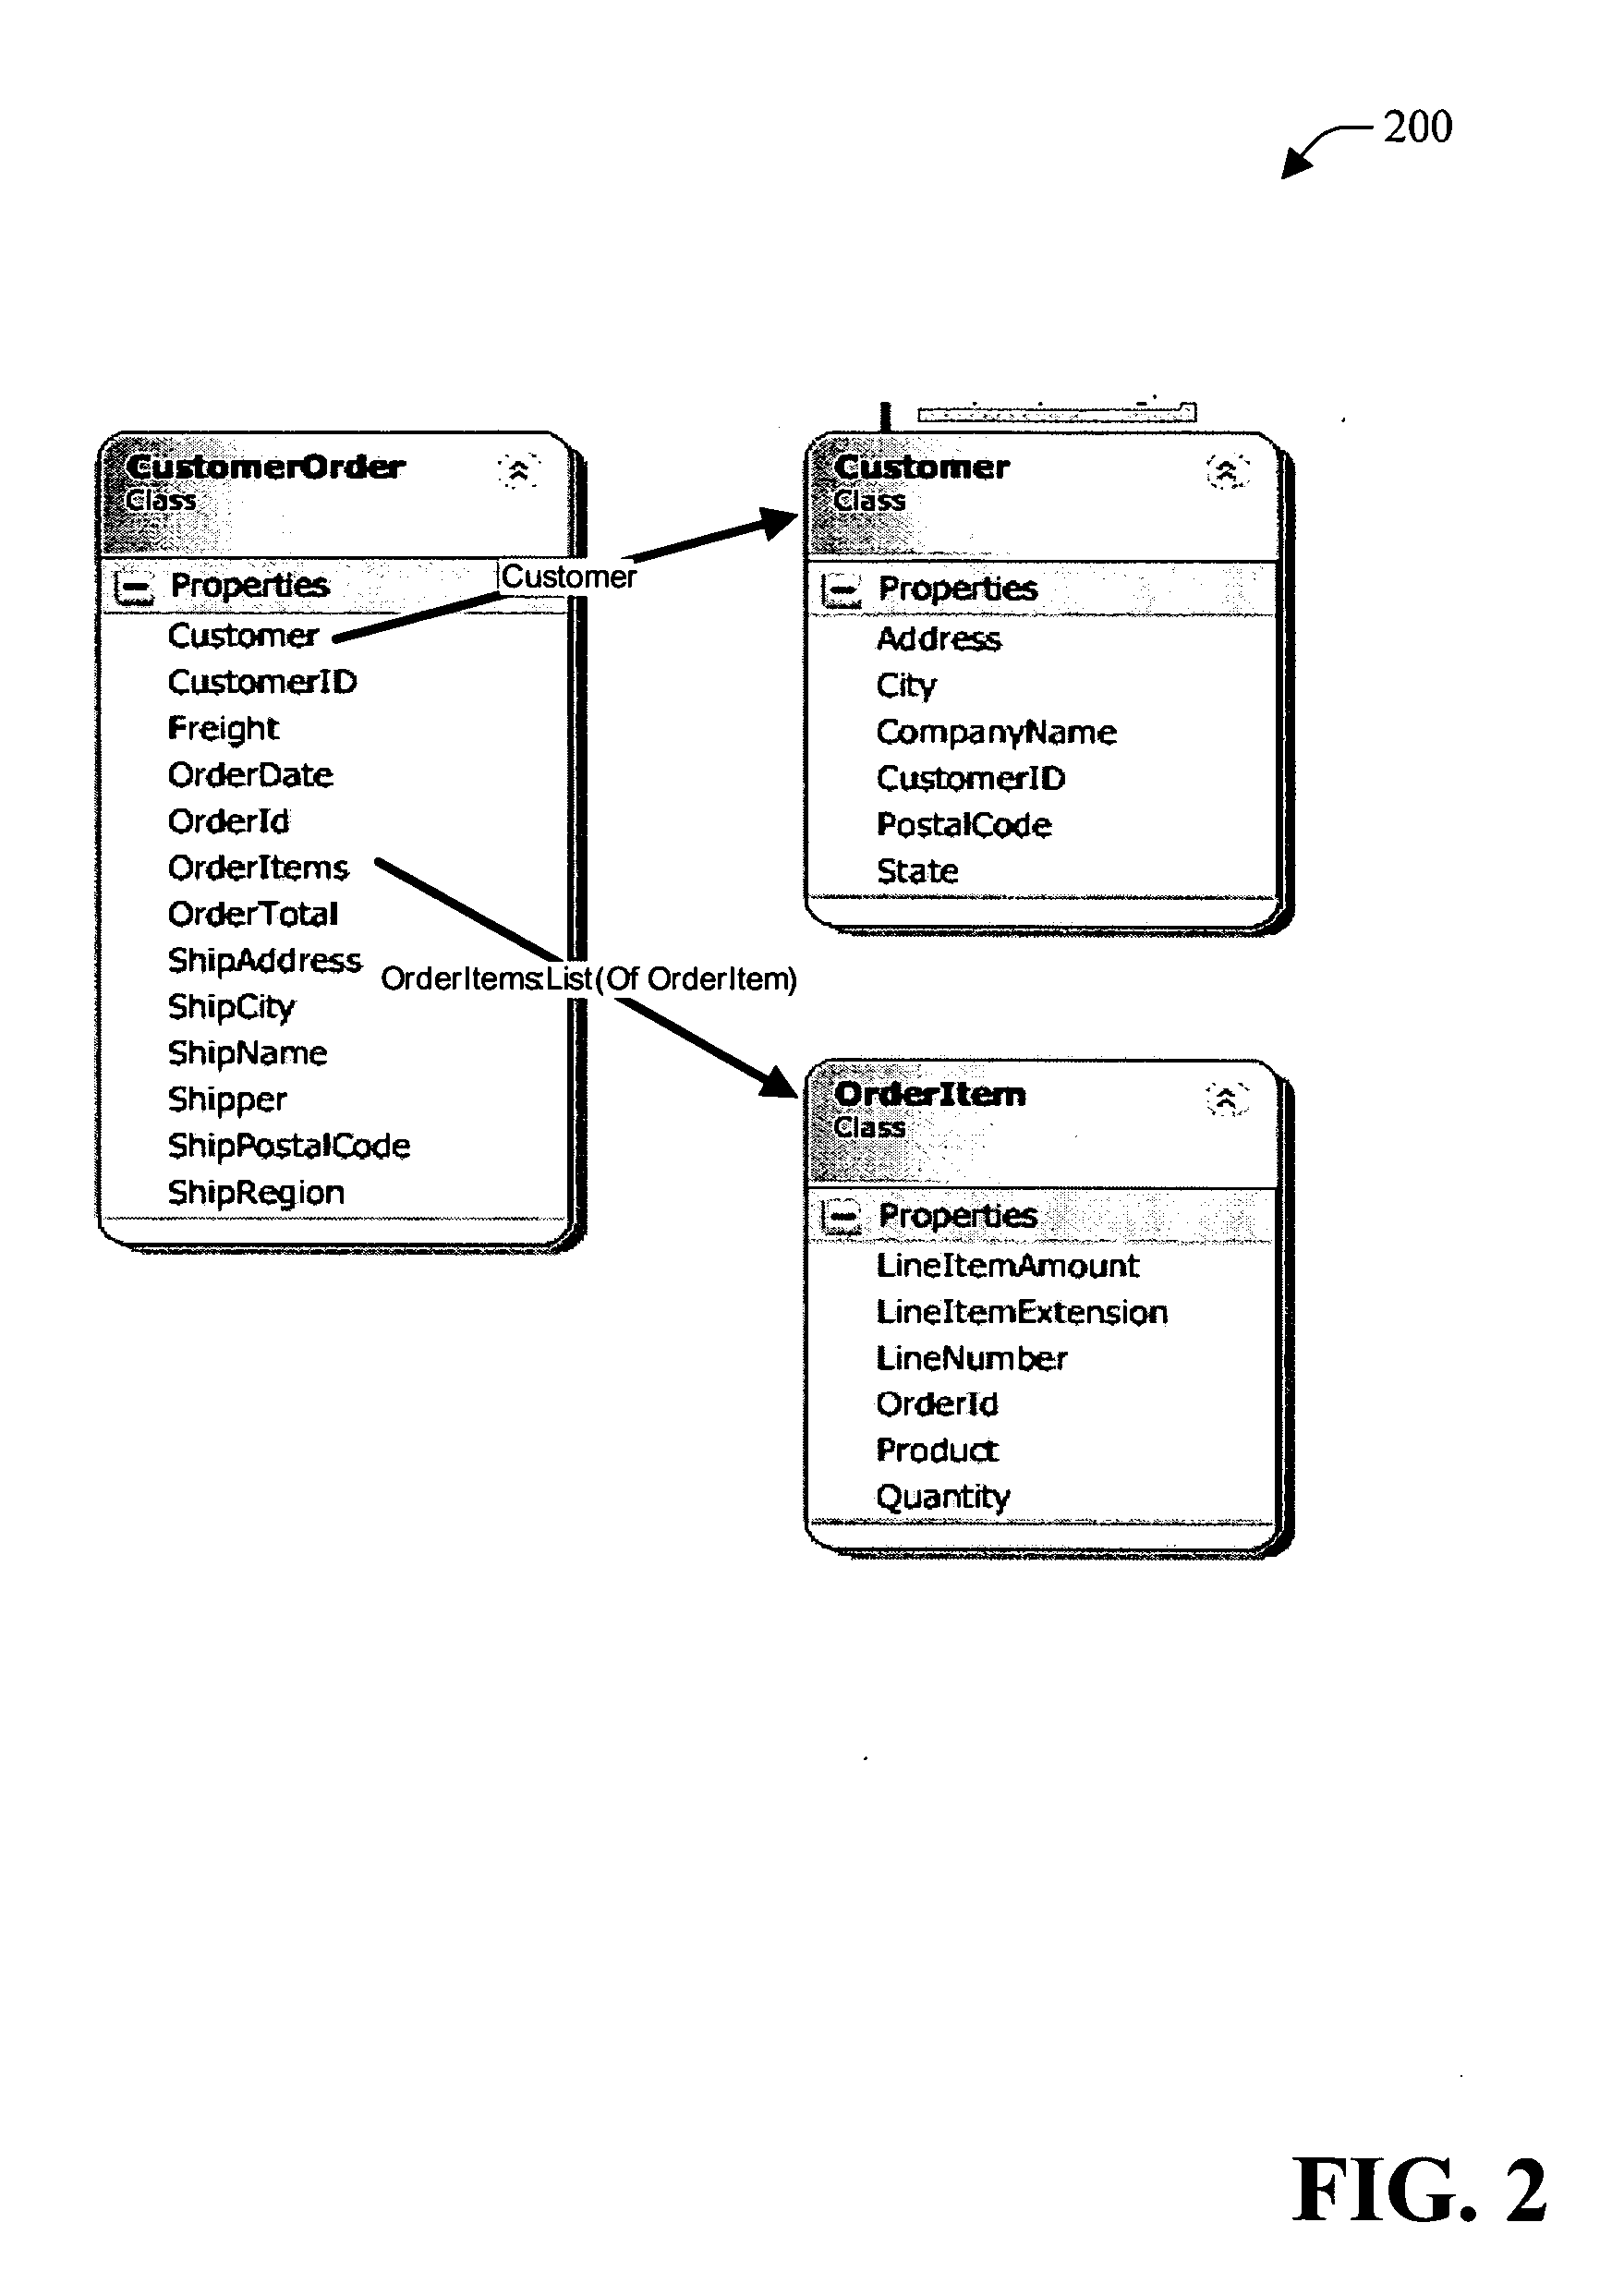 Binding to business objects and web services